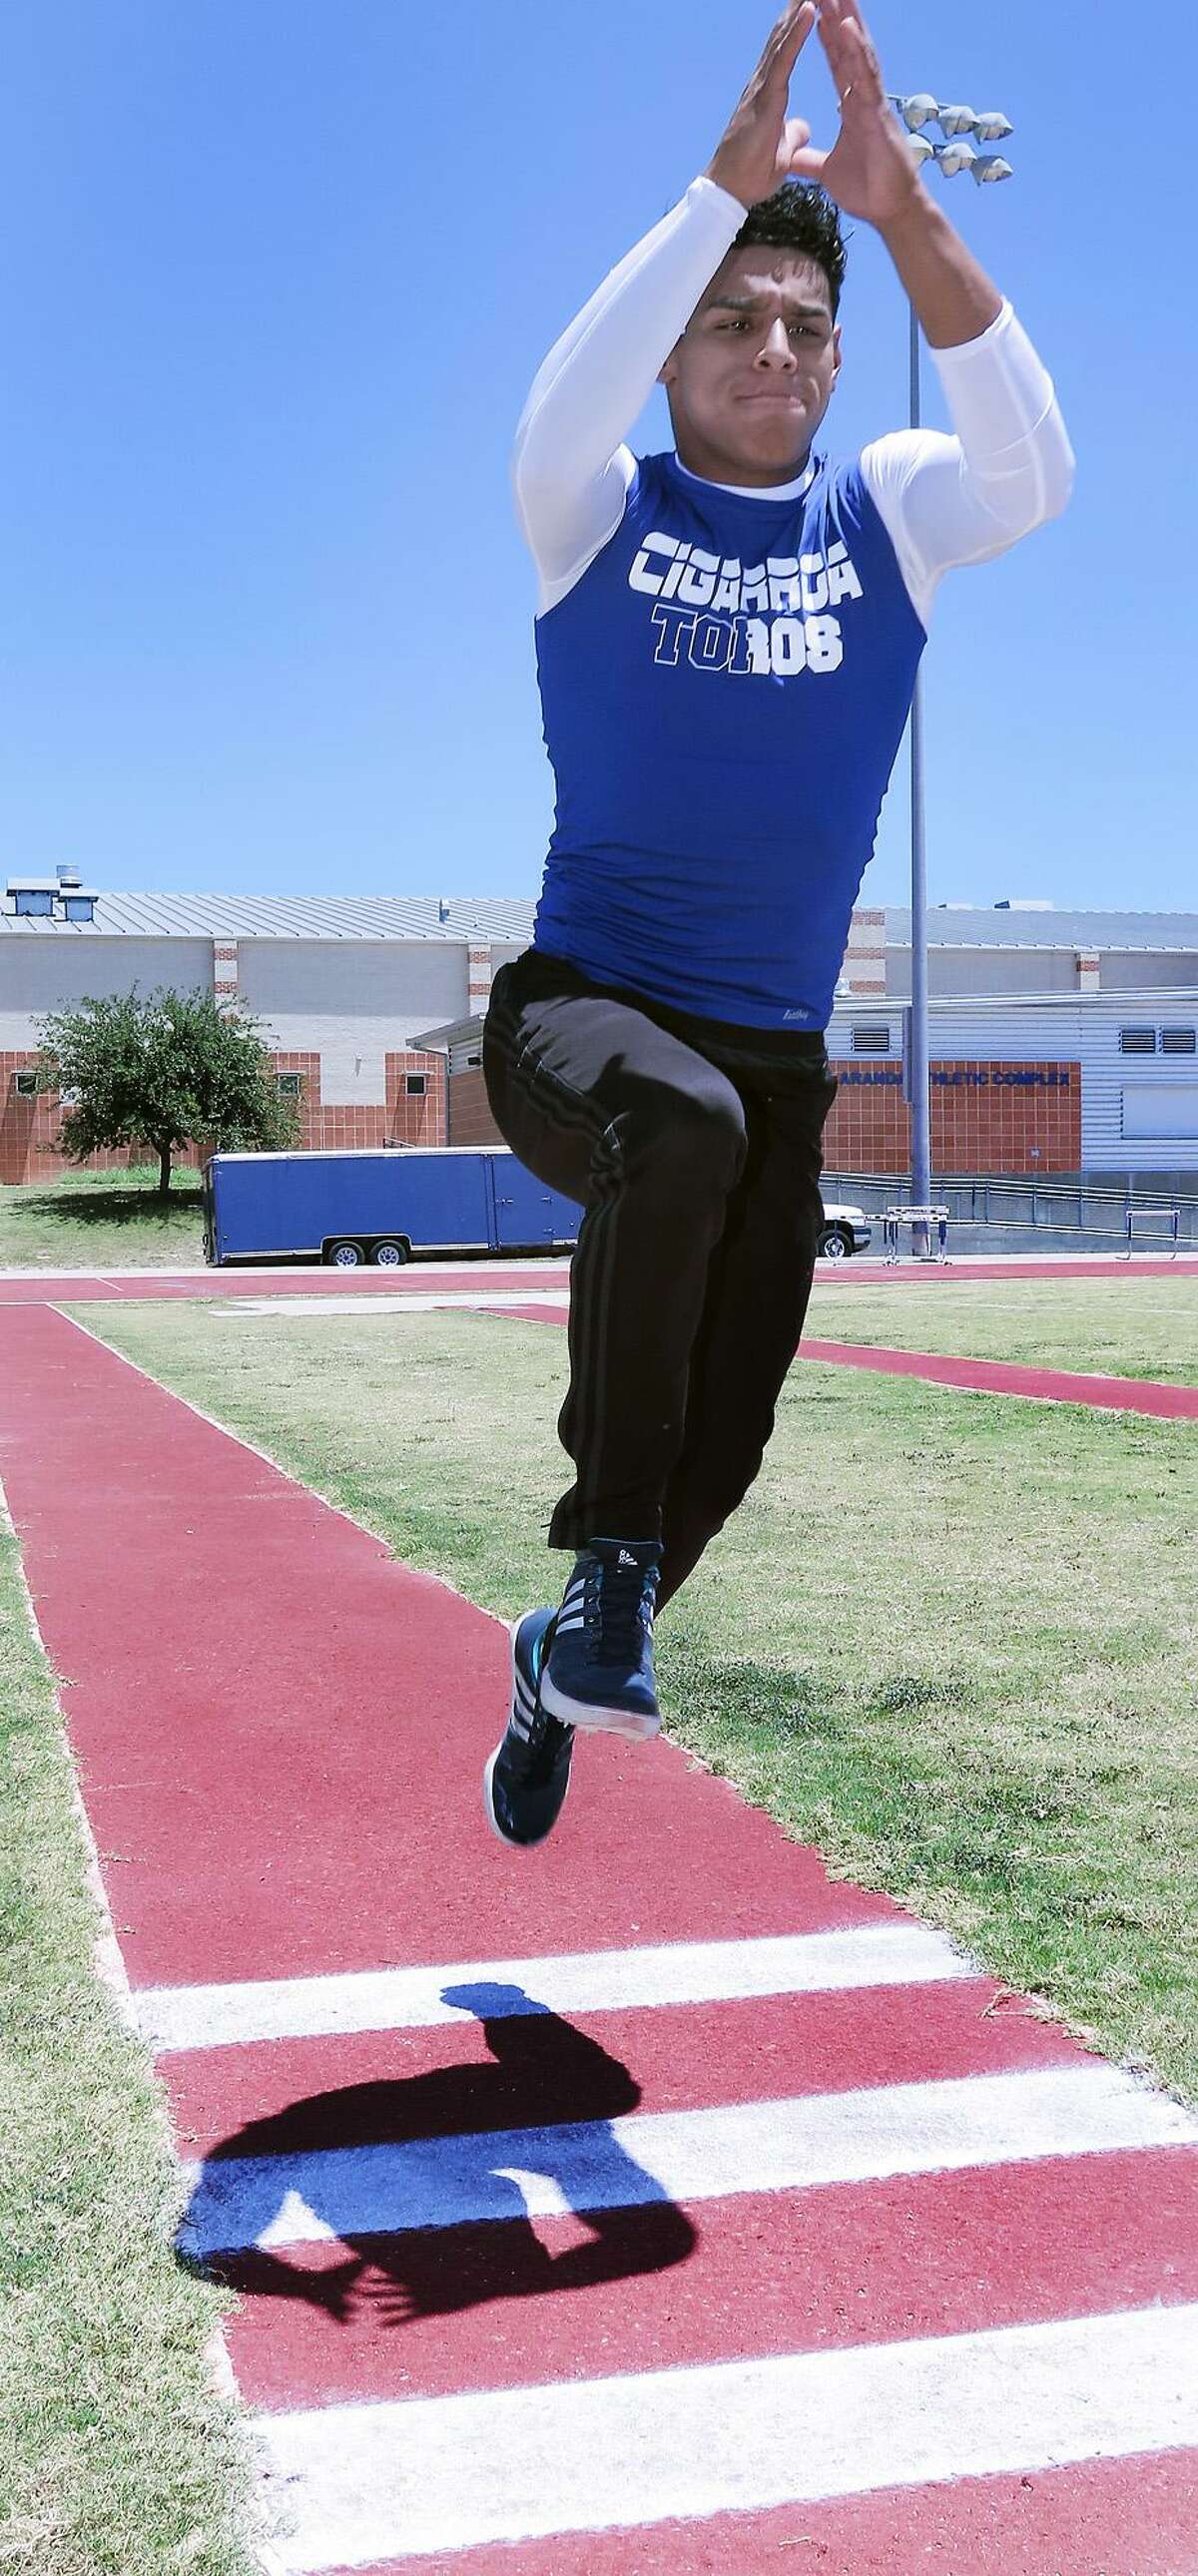 Antonio De La Torre is heading to the state meet for the second straight season but with a new event, classification and school. He will represent Cigarroa in the triple jump.